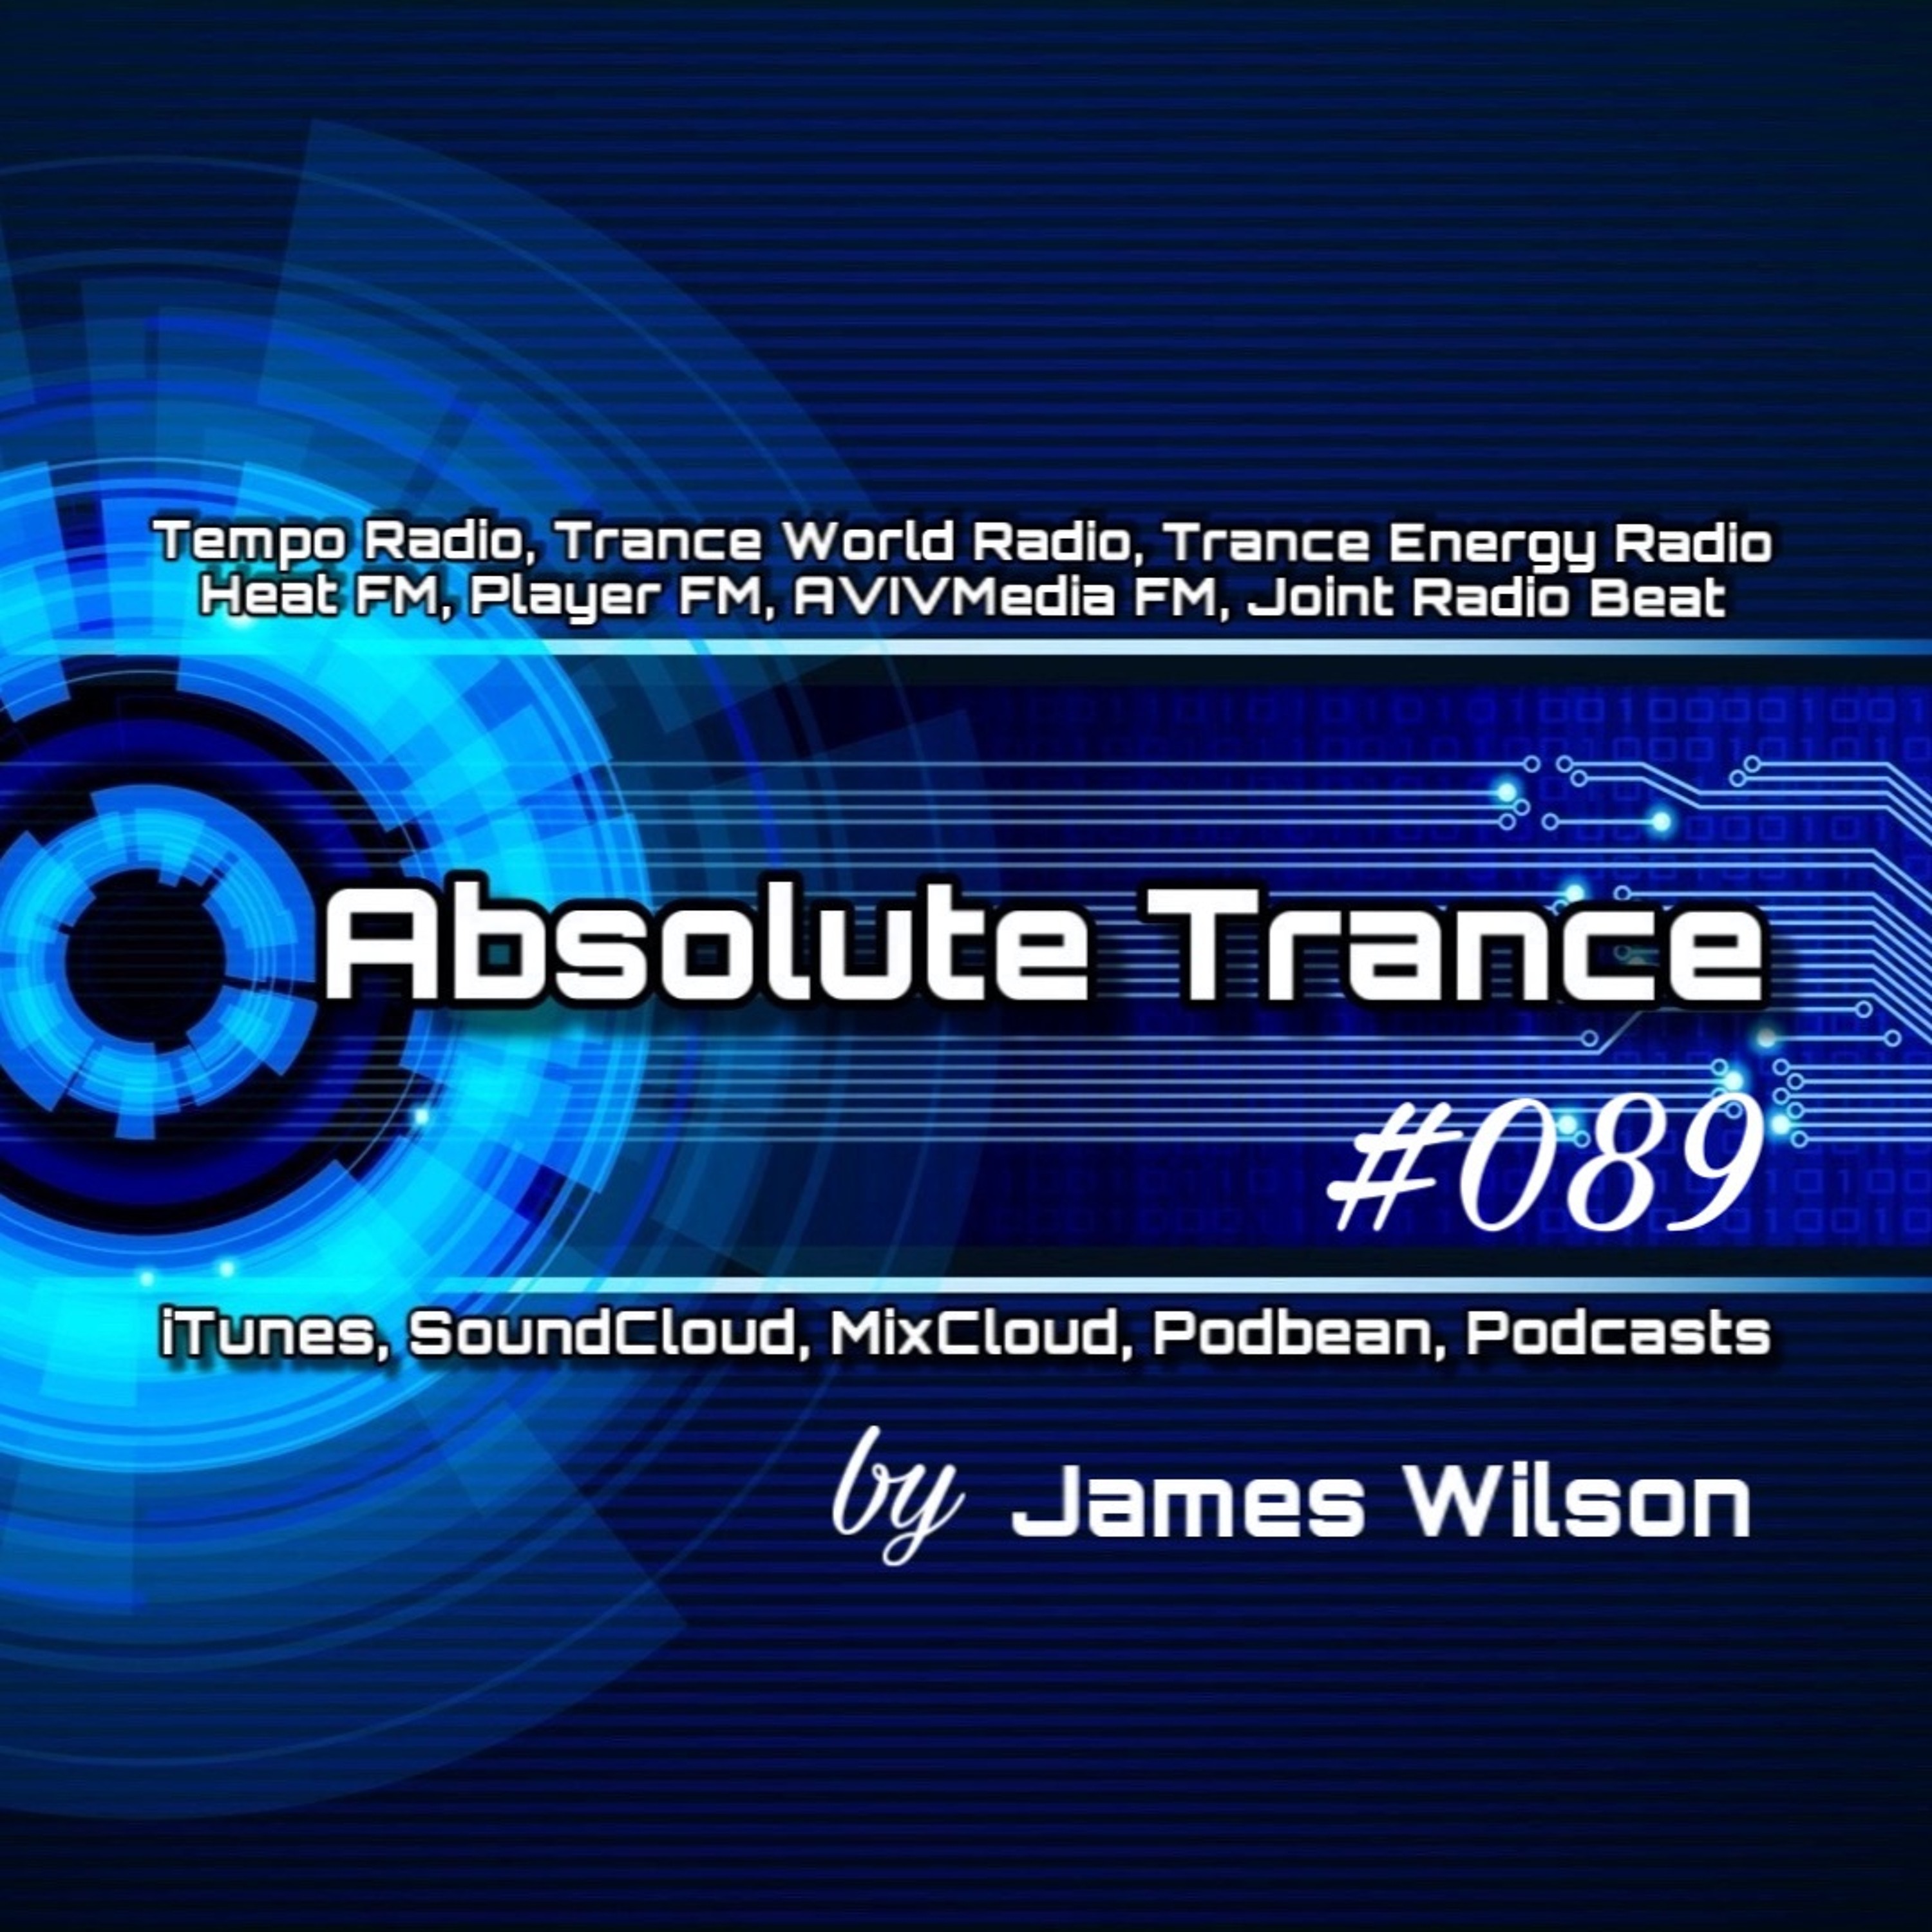 Absolute Trance #089